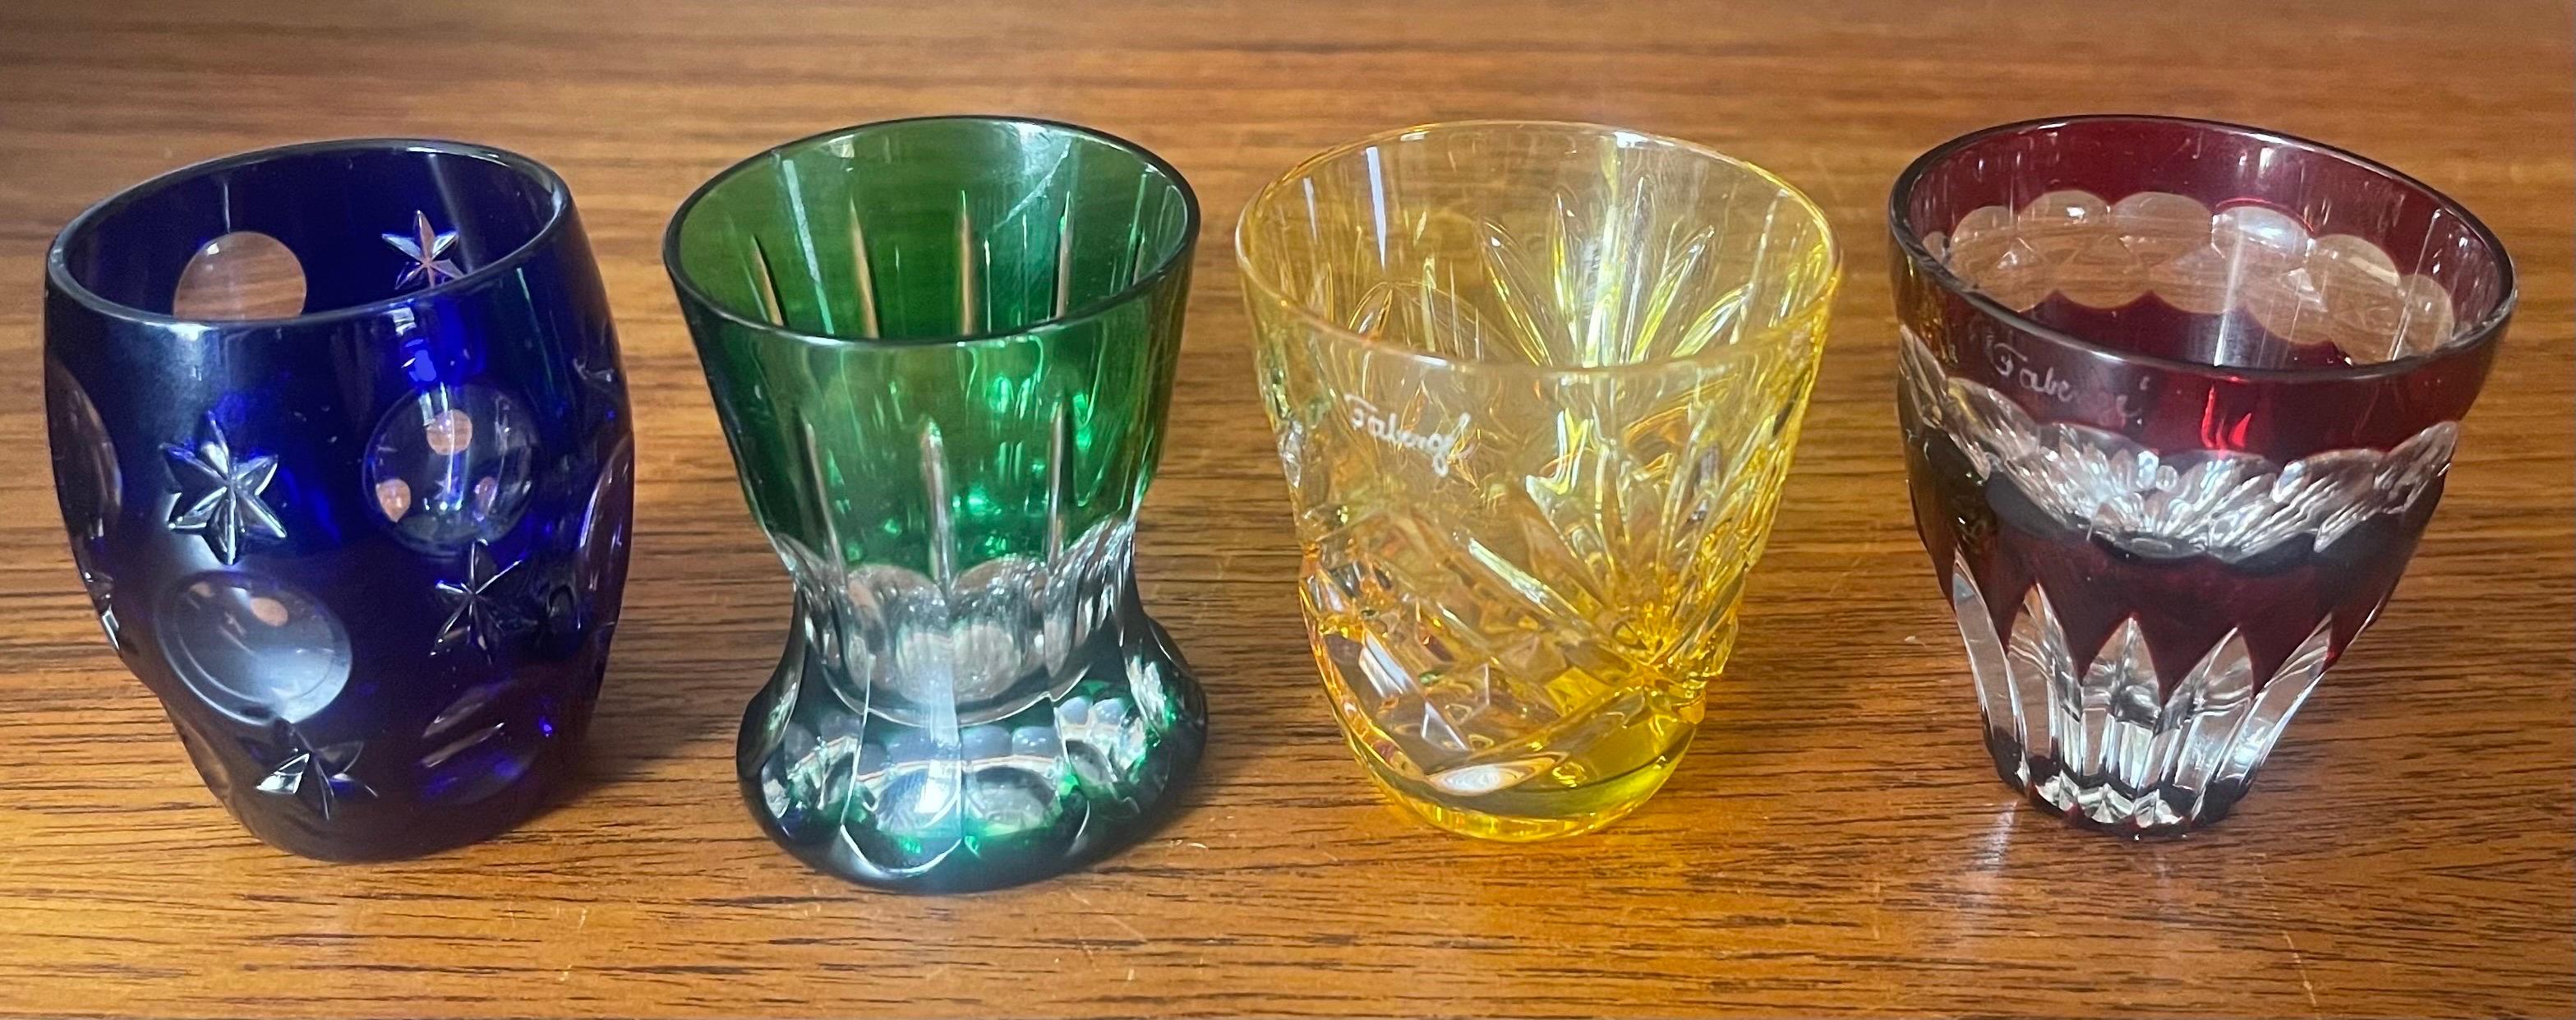 A collection of four miniature imperial glasses and case by The House of Faberge, circa 1990s. The glasses are in very good condition with no chips or cracks and each one measures approximately 2.5